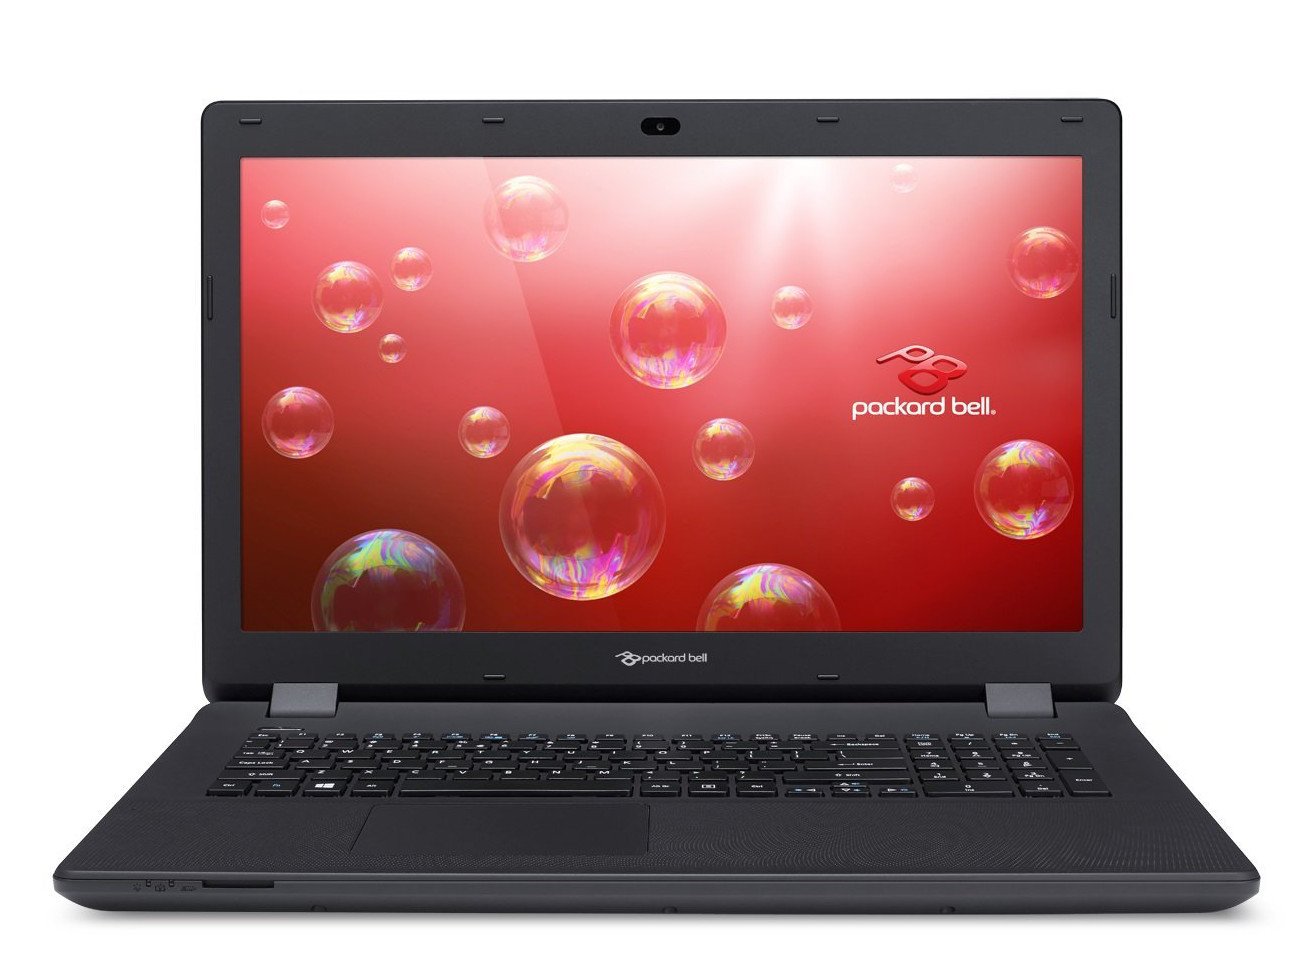 [Promo] A 17-inch Packard Bell PC for € 249